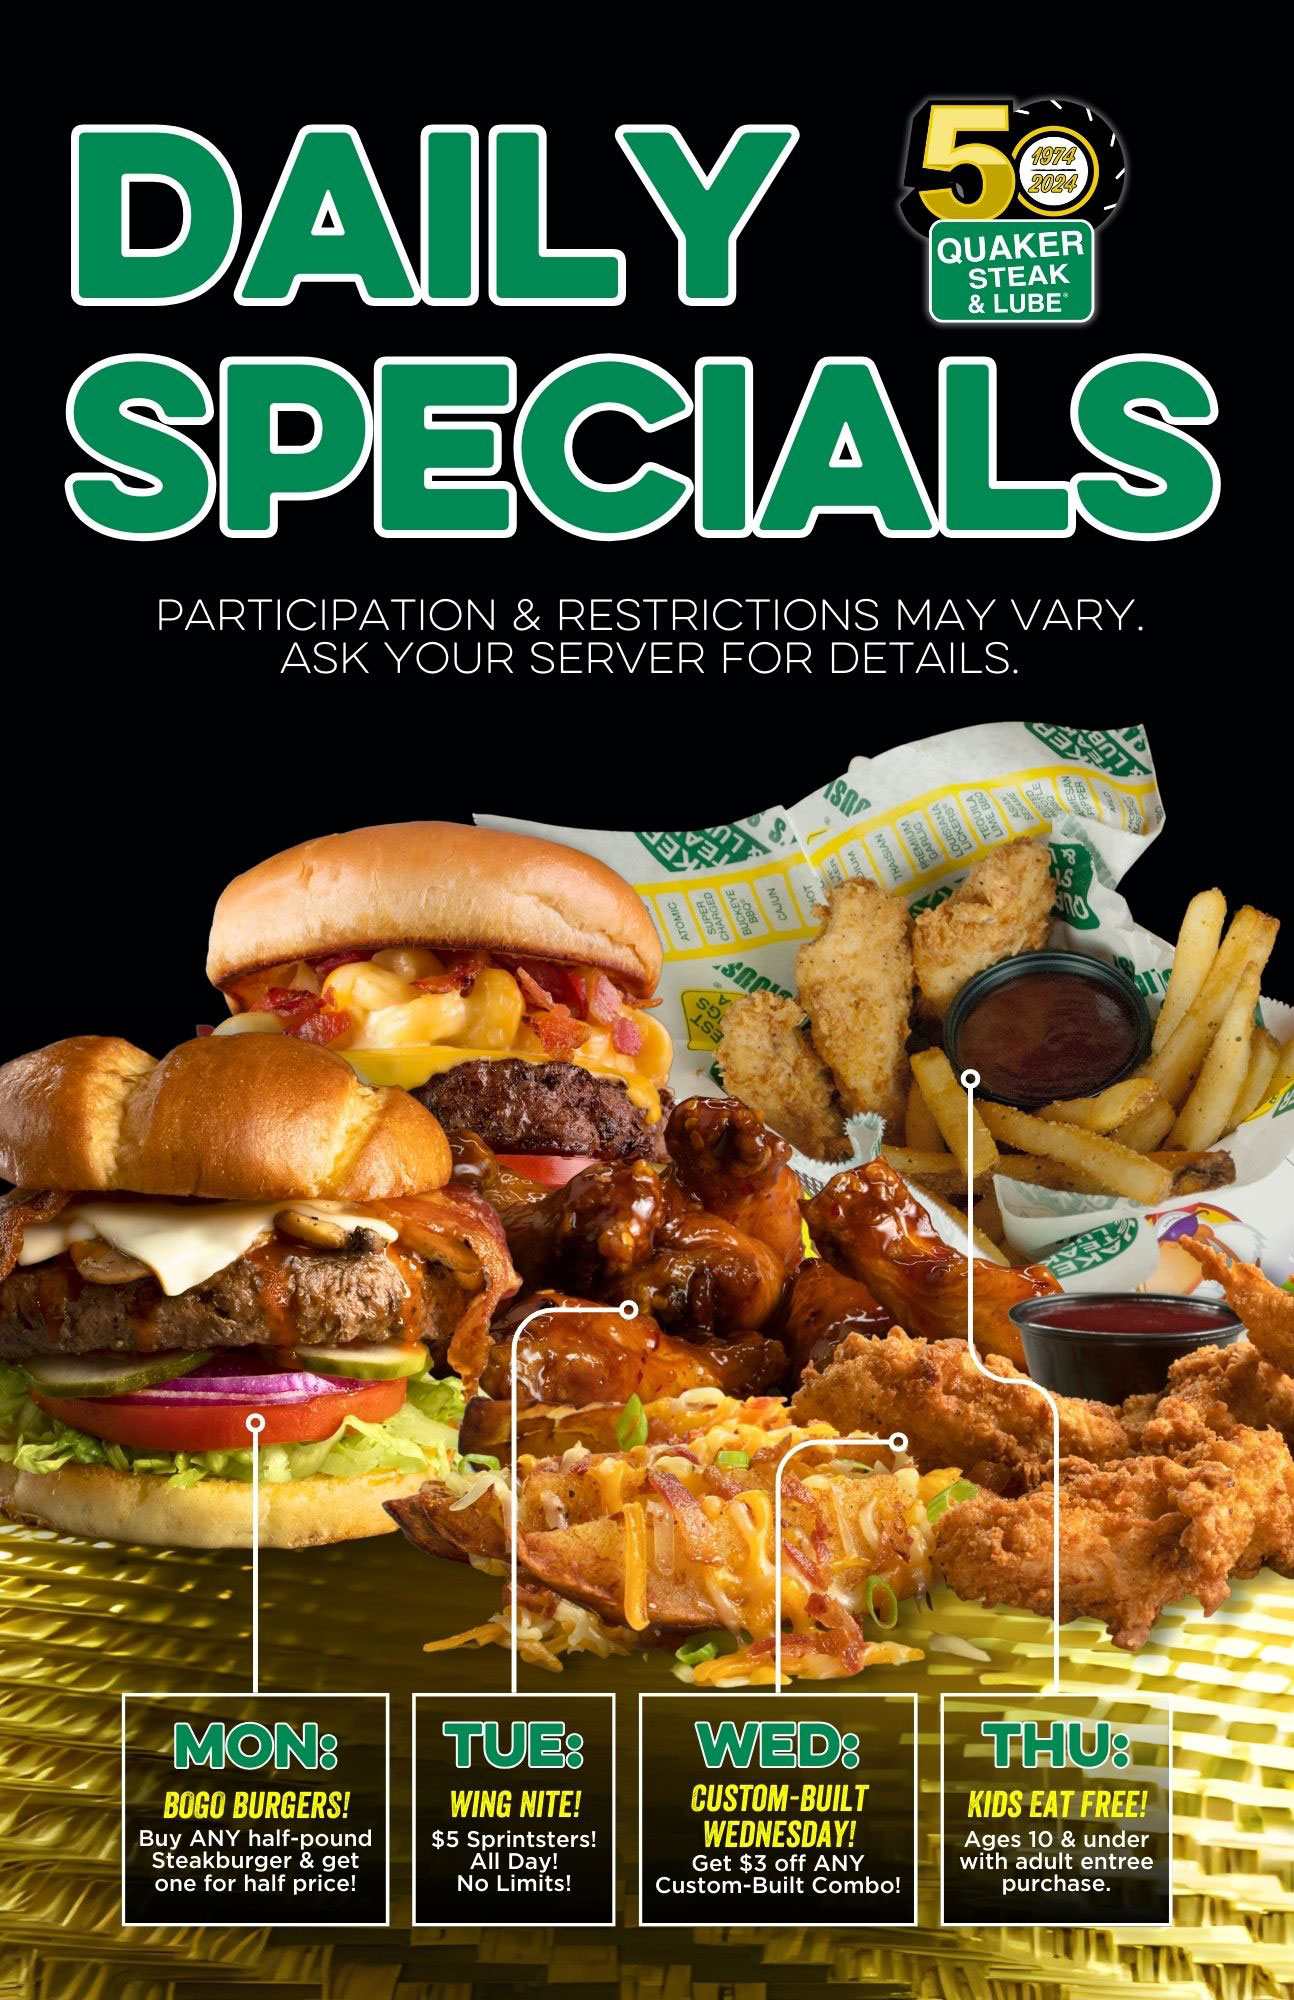 Daily Specials At the Quaker Steak & Lube Canton Restaurant